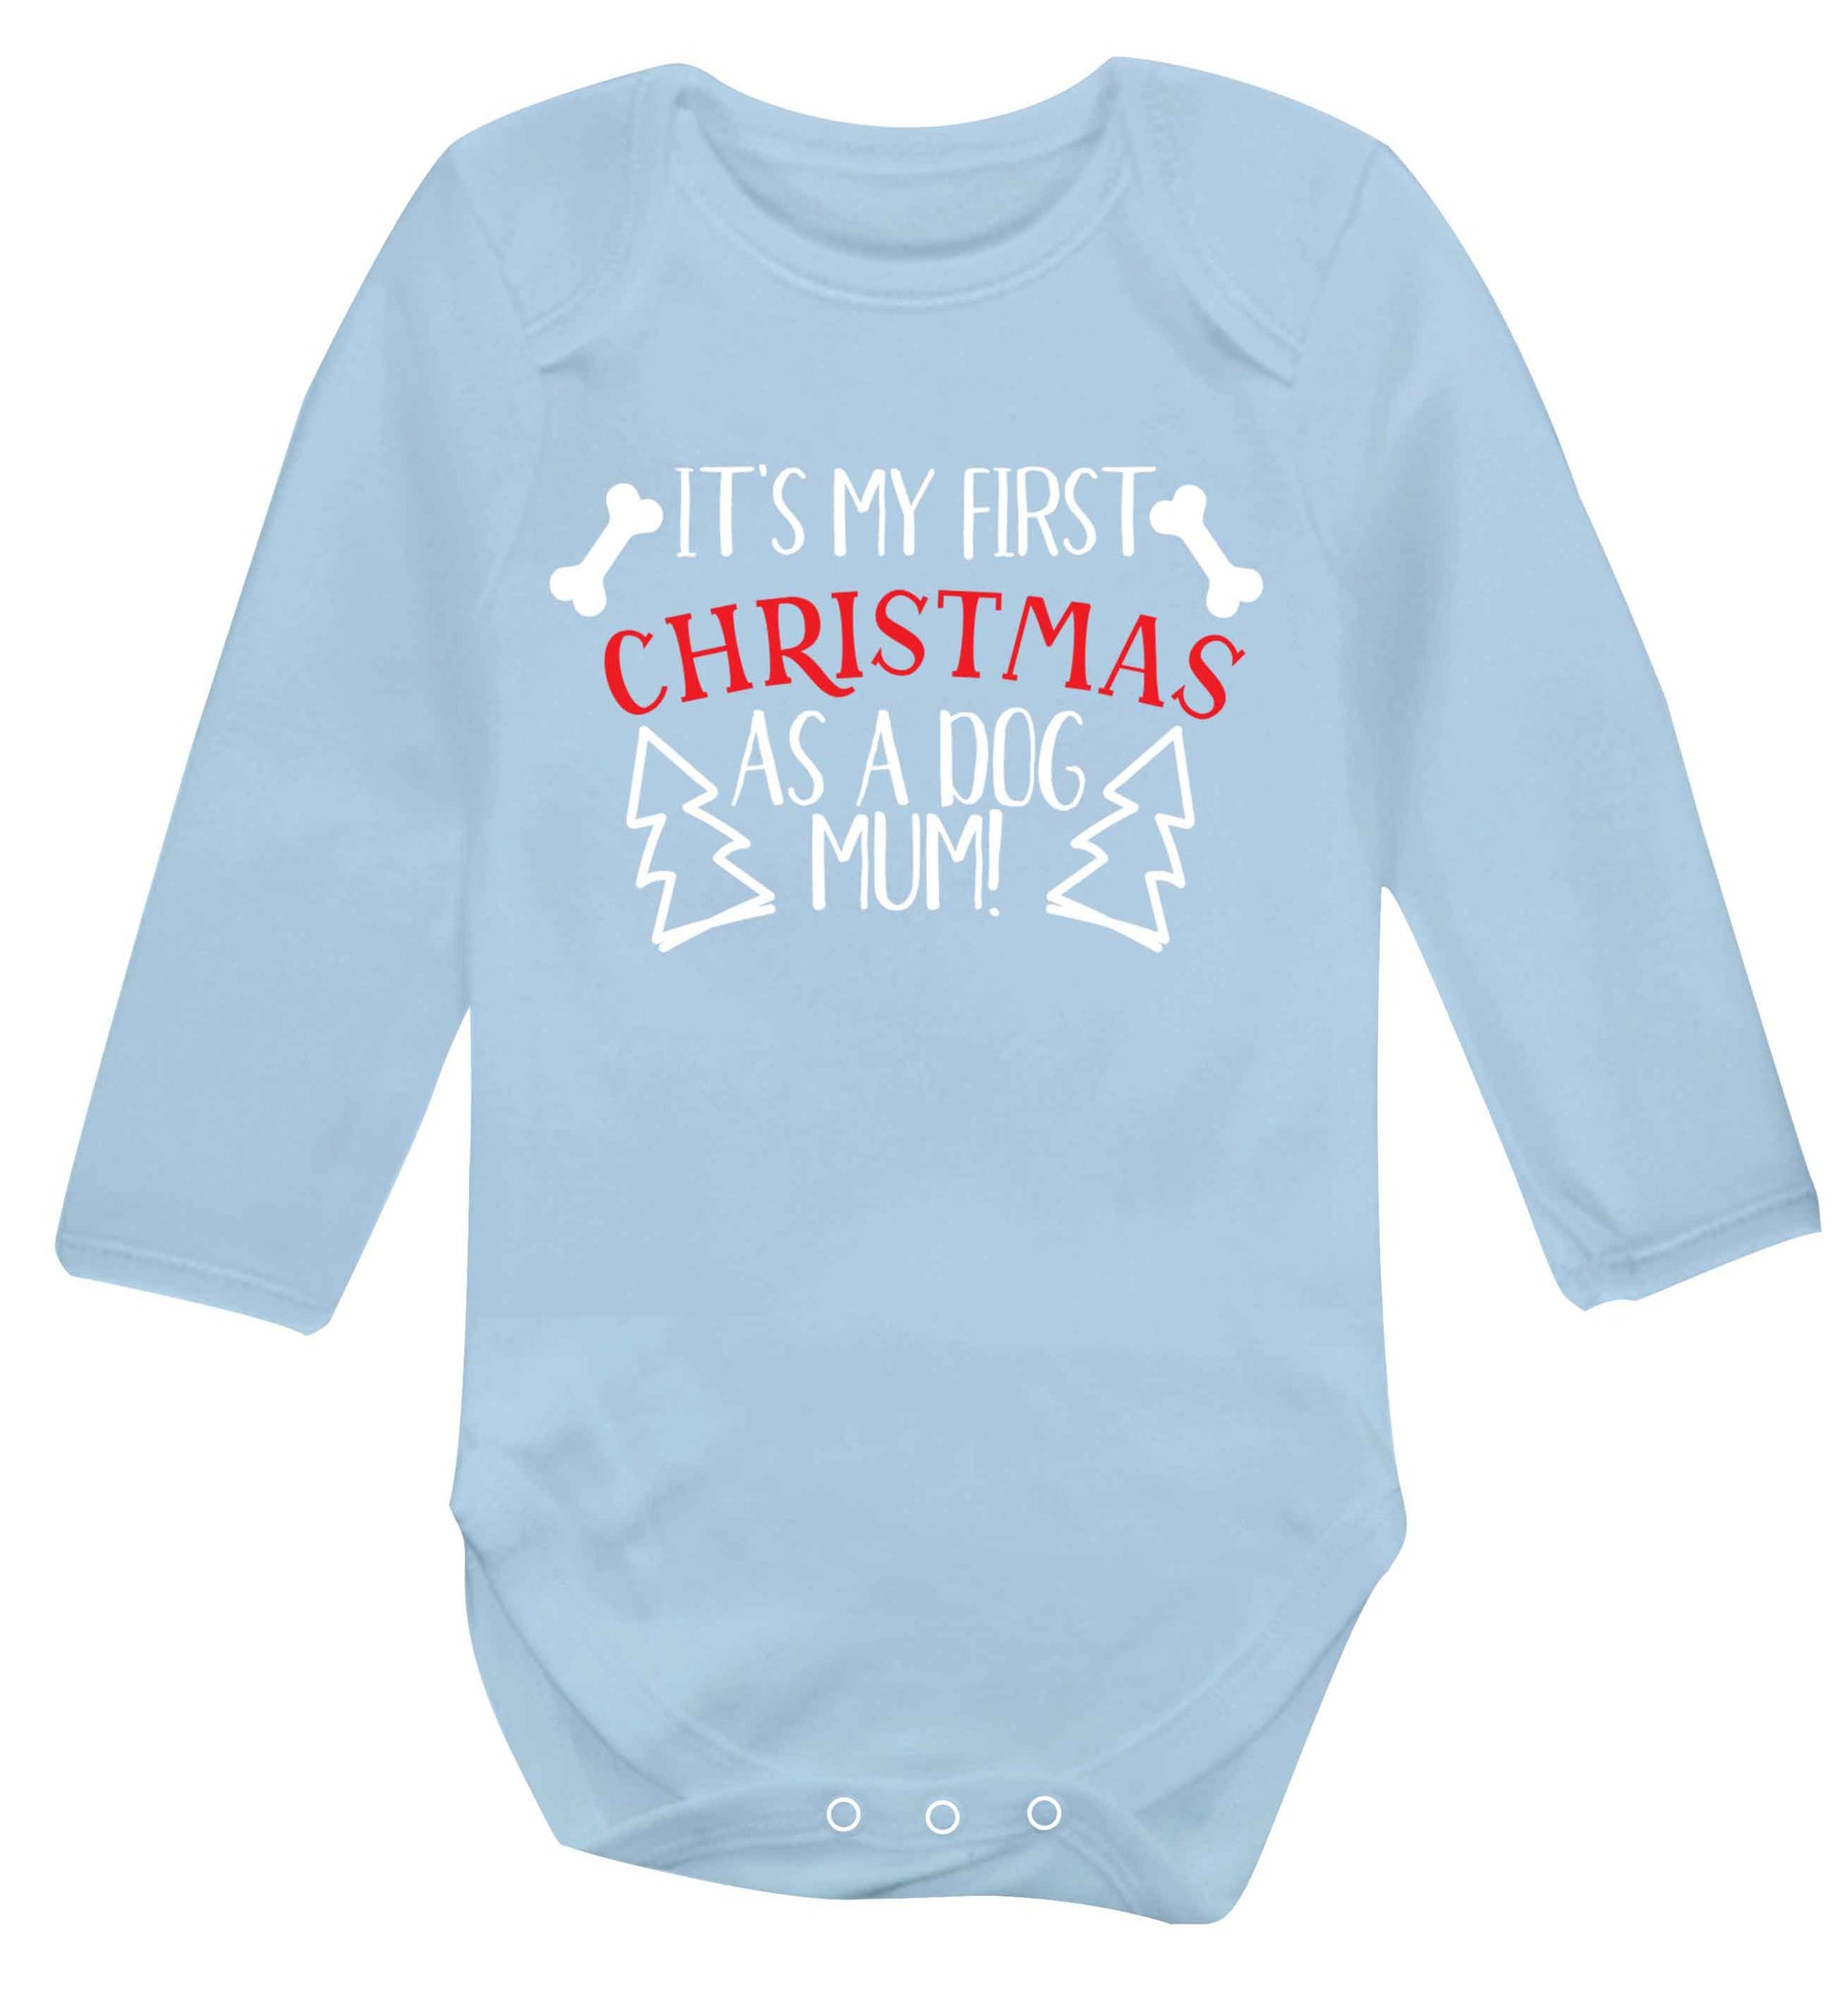 It's my first Christmas as a dog mum! Baby Vest long sleeved pale blue 6-12 months